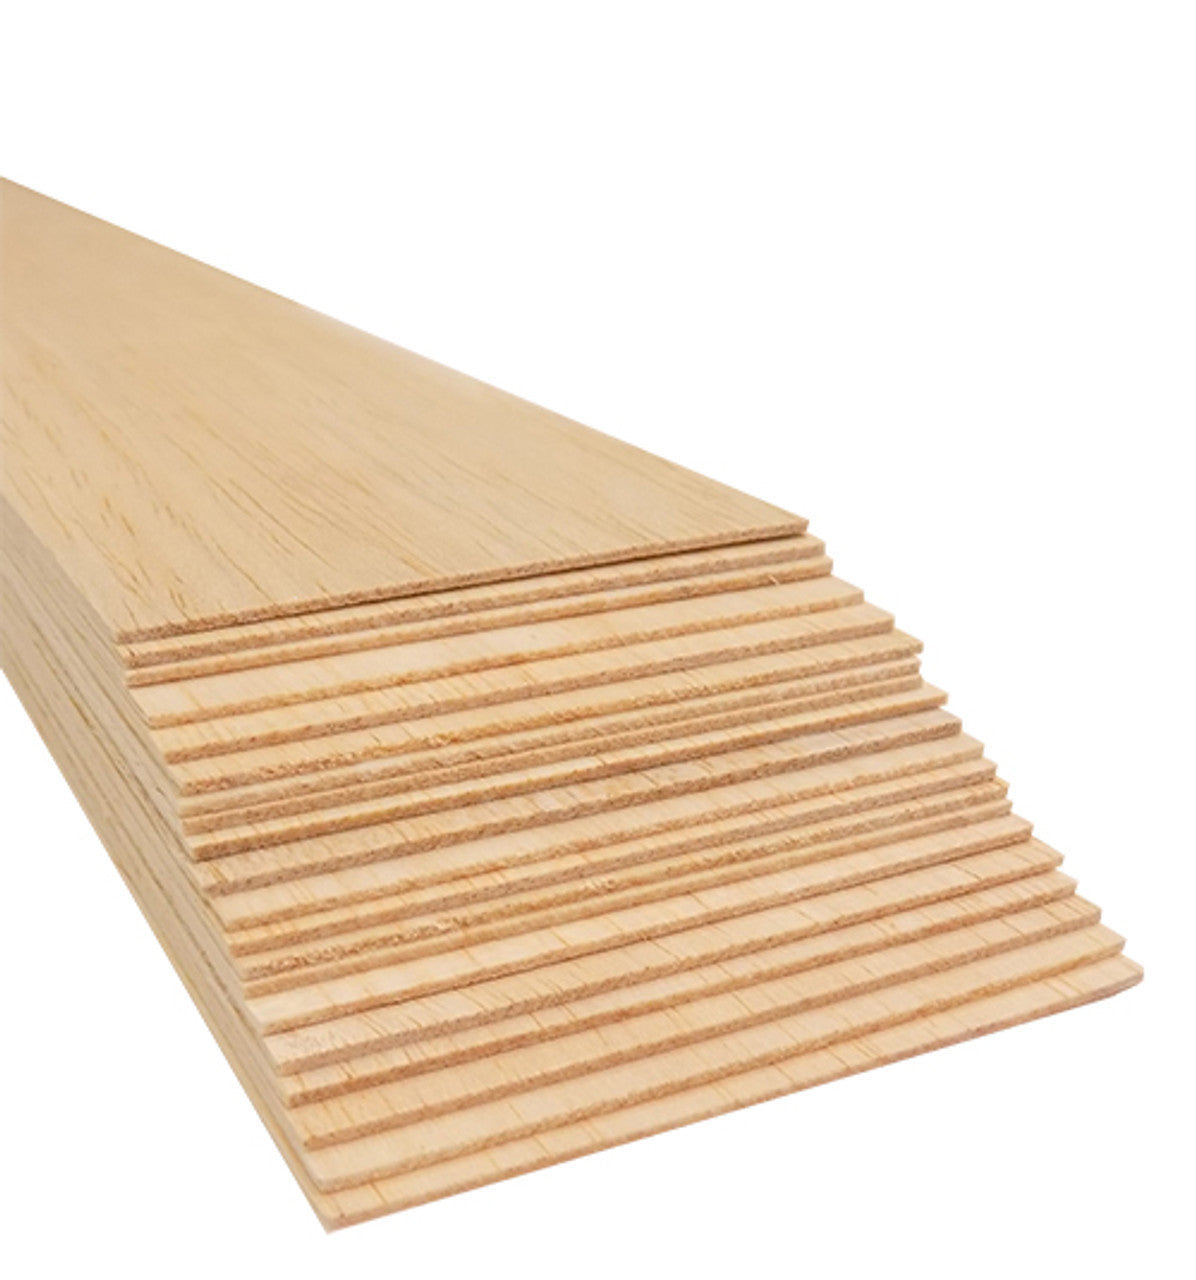 Basswood Sheets 1/8x4x24